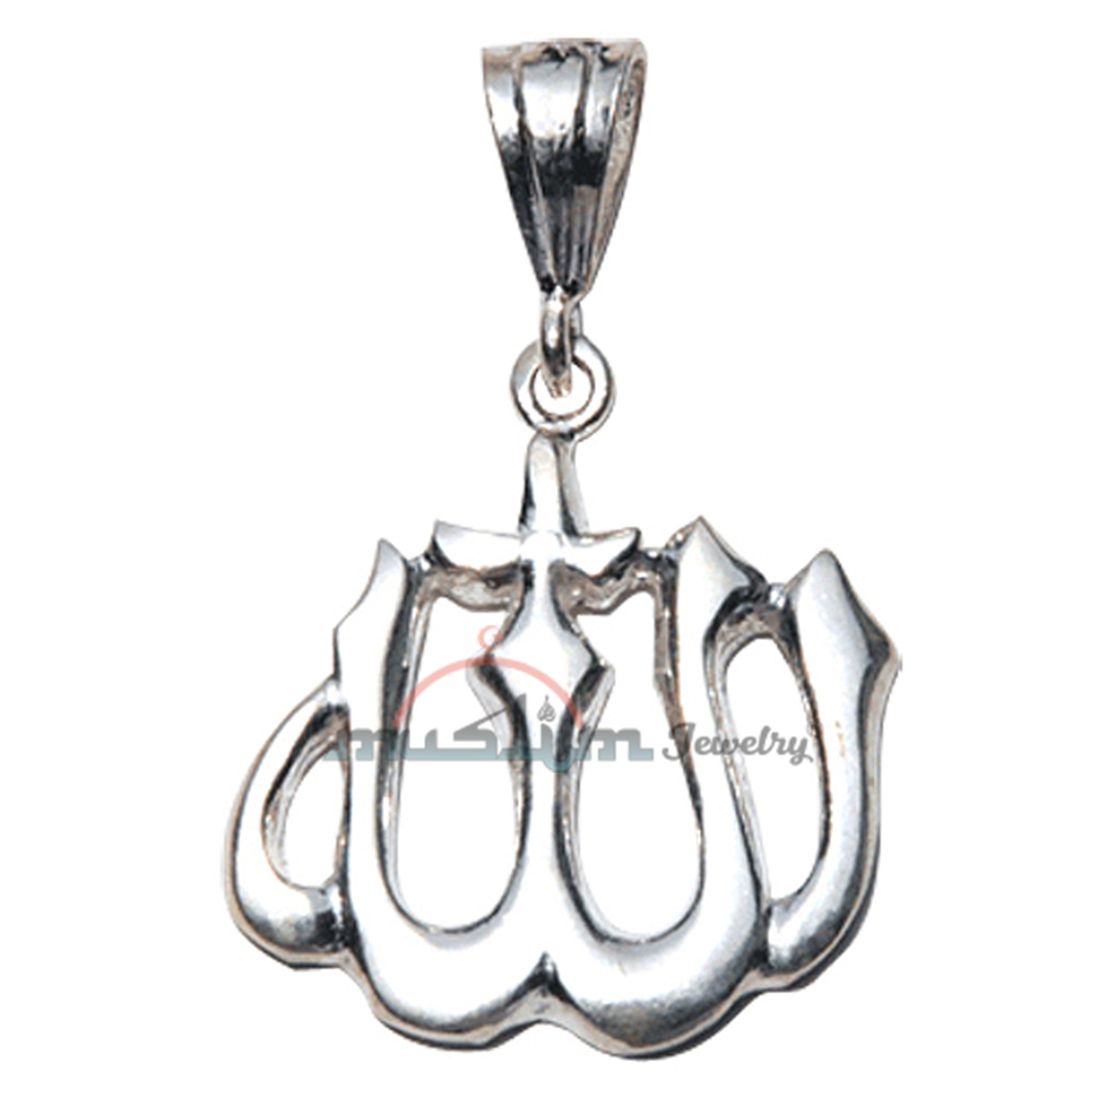 Extra-large Size Sterling Silver Bold Font Cut-out Style Allah Pendant – Islamic Moslem Jewelry